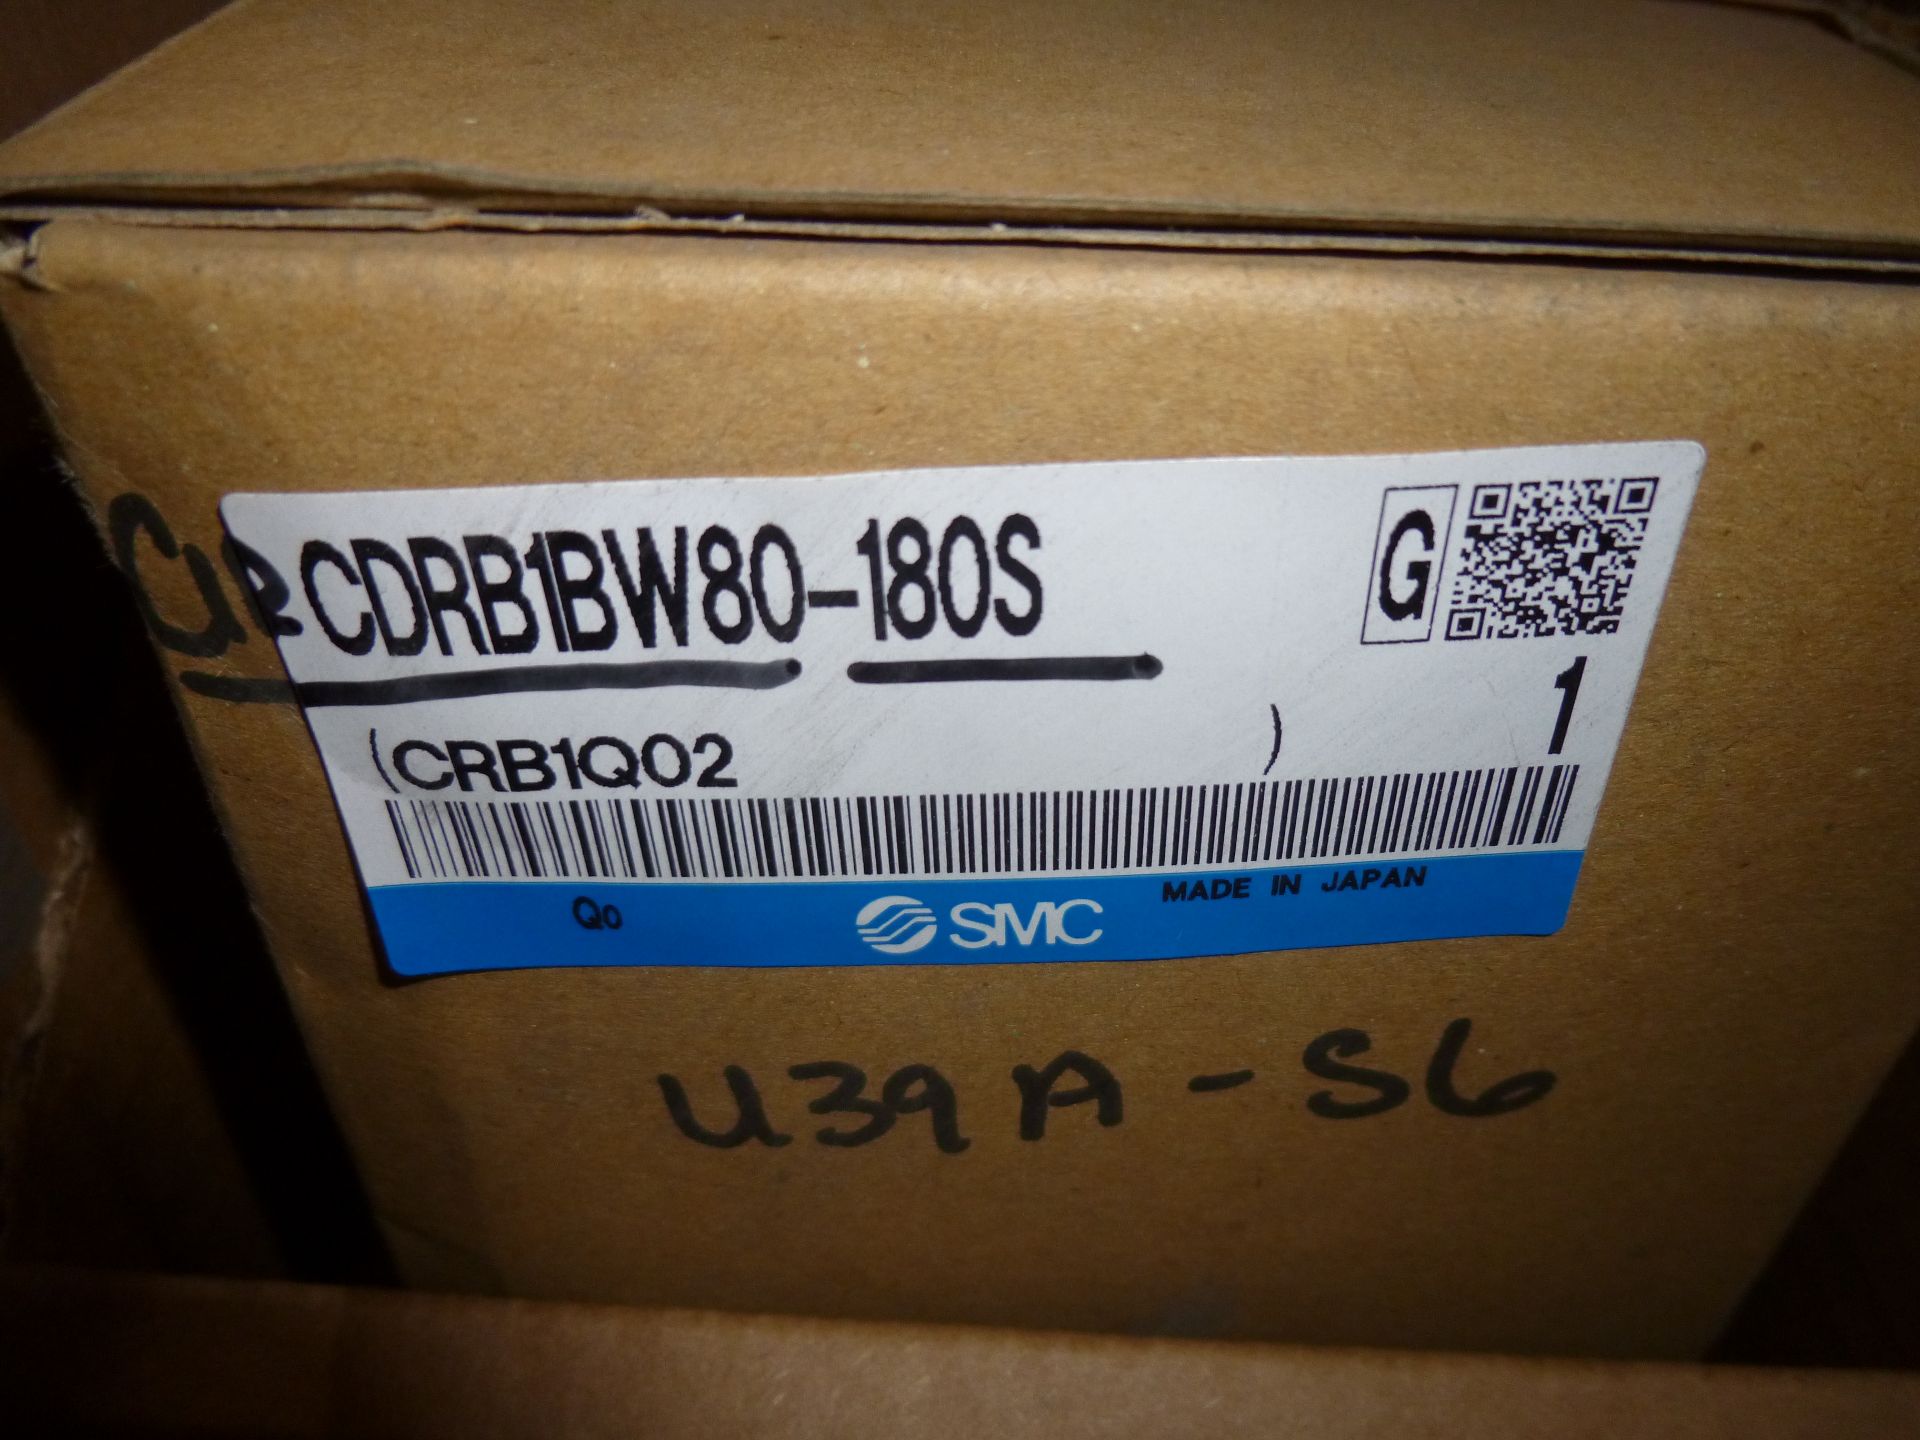 SMC rotary cylinder CDRB1BW80-180S, new in box, as always with Brolyn LLC auctions, all lots can - Image 2 of 2